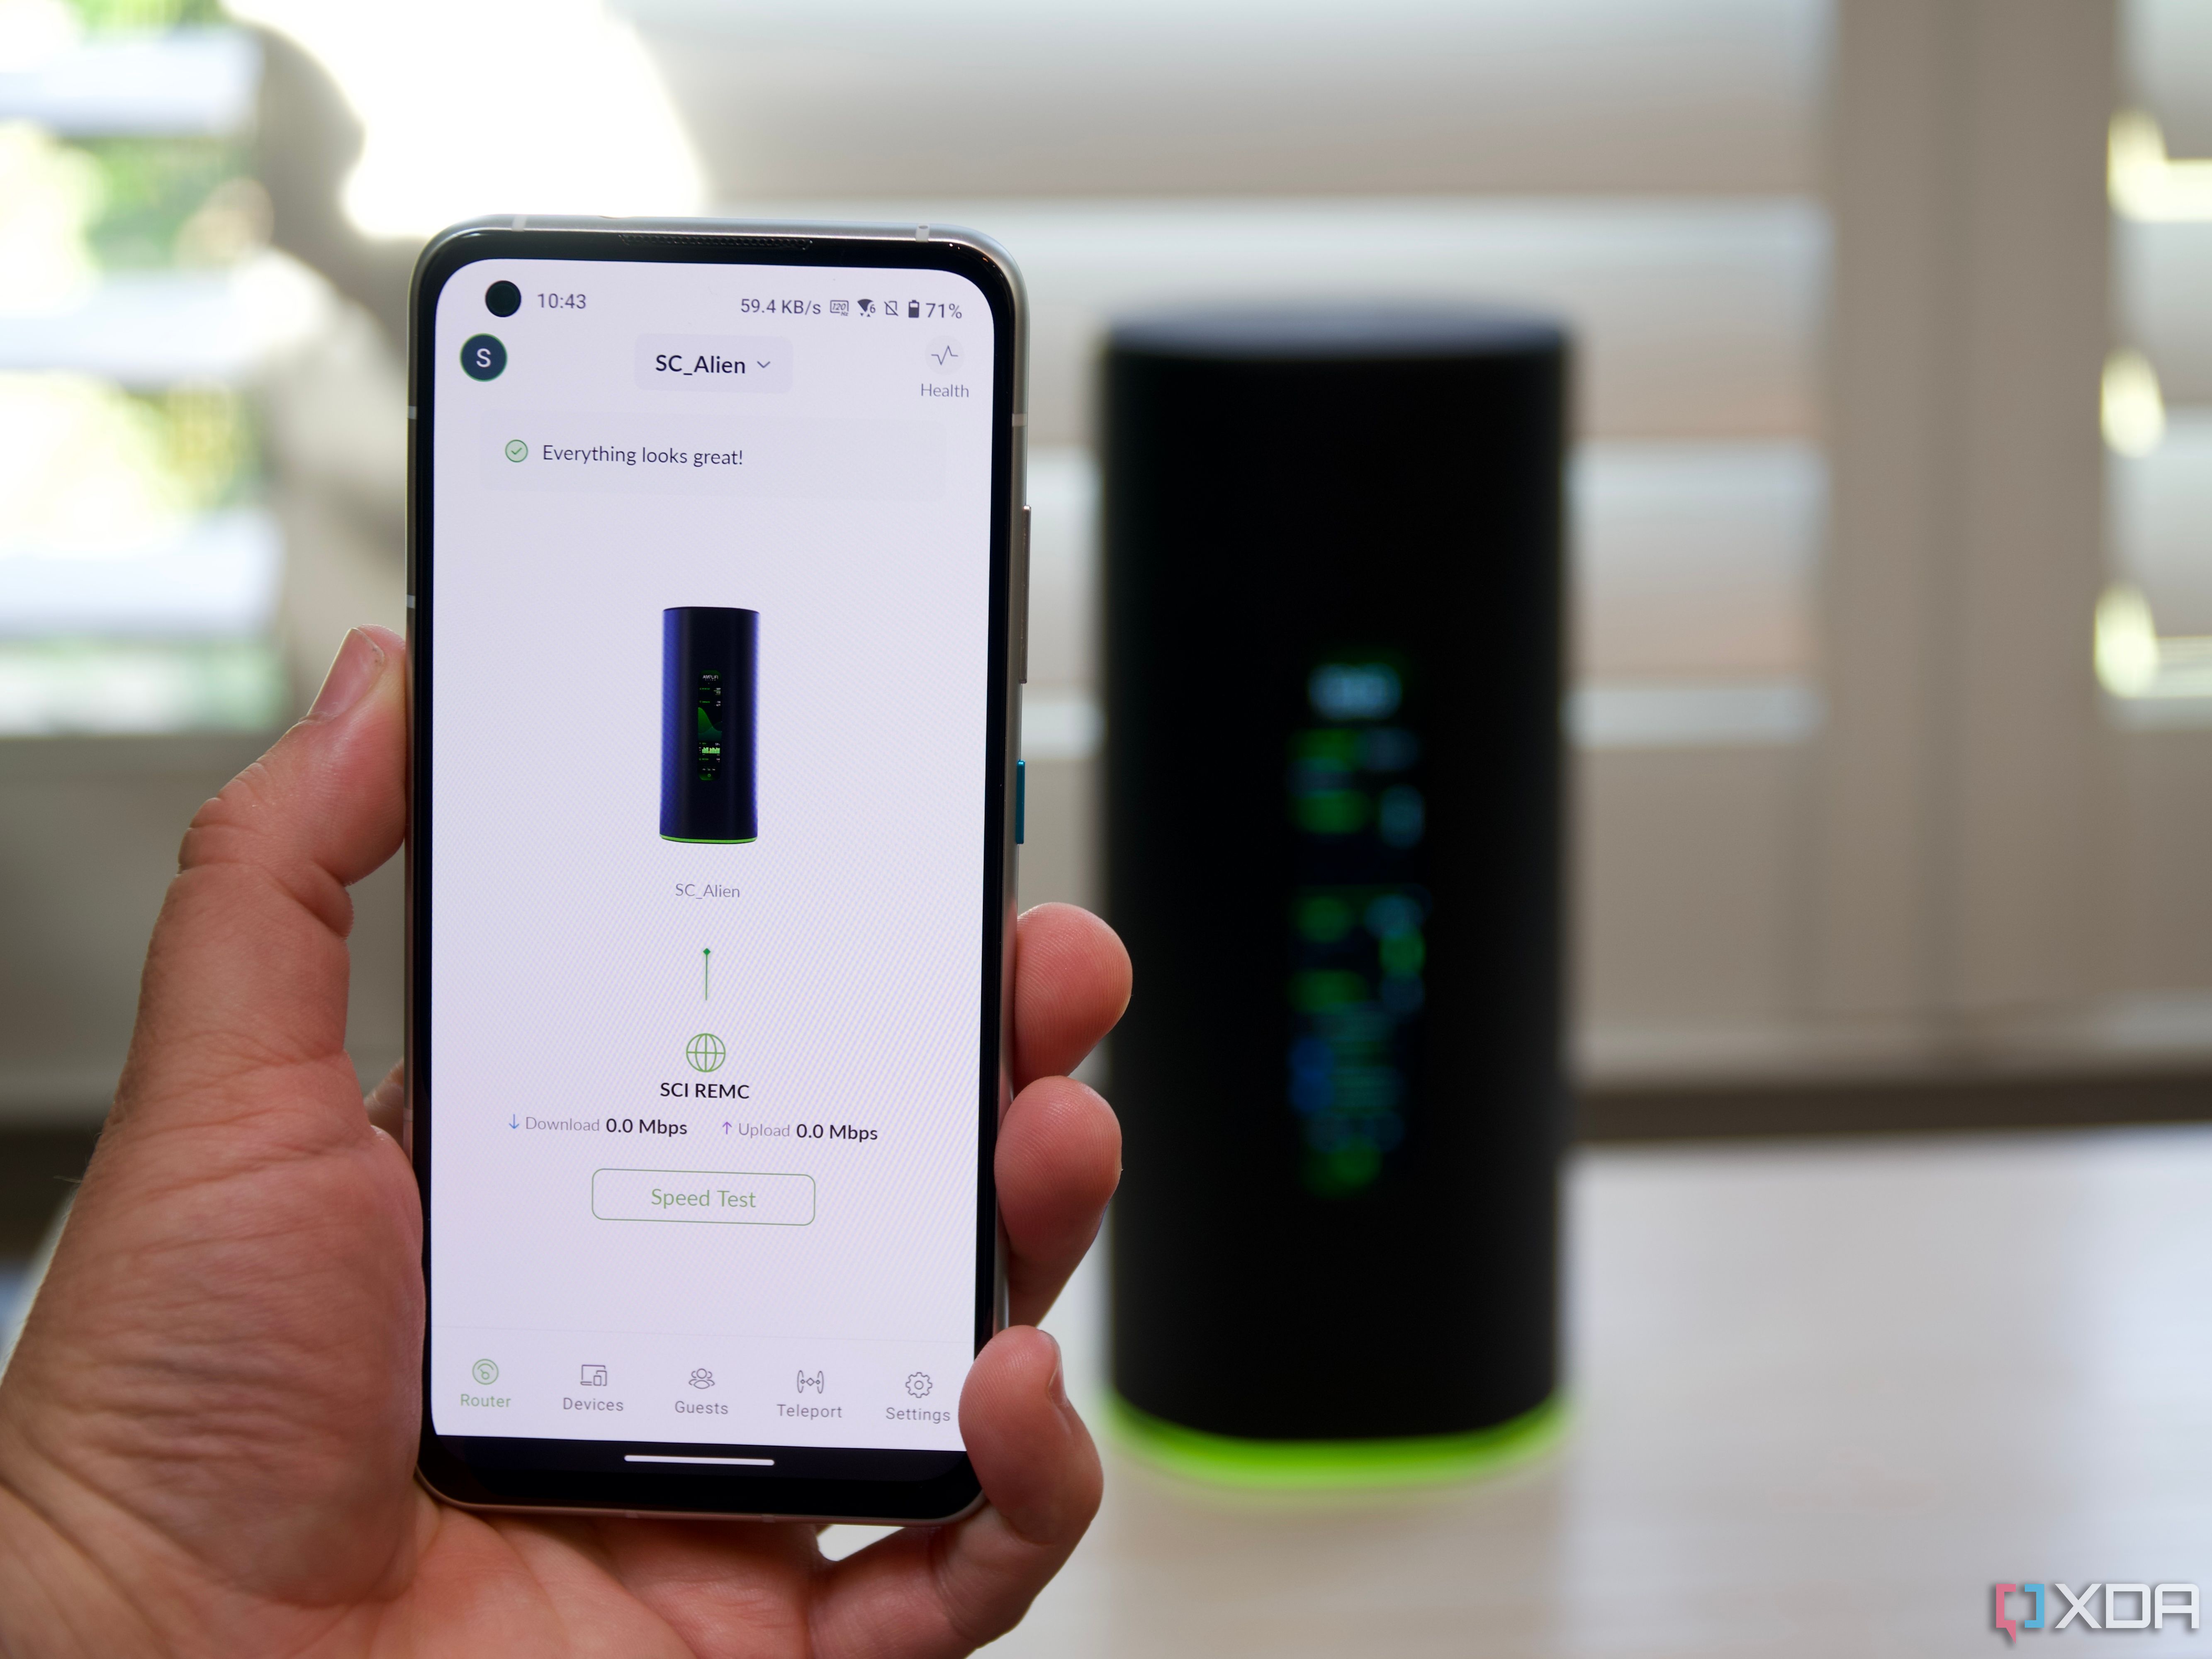 The AmpliFi app is the easiest way to control the Alien router